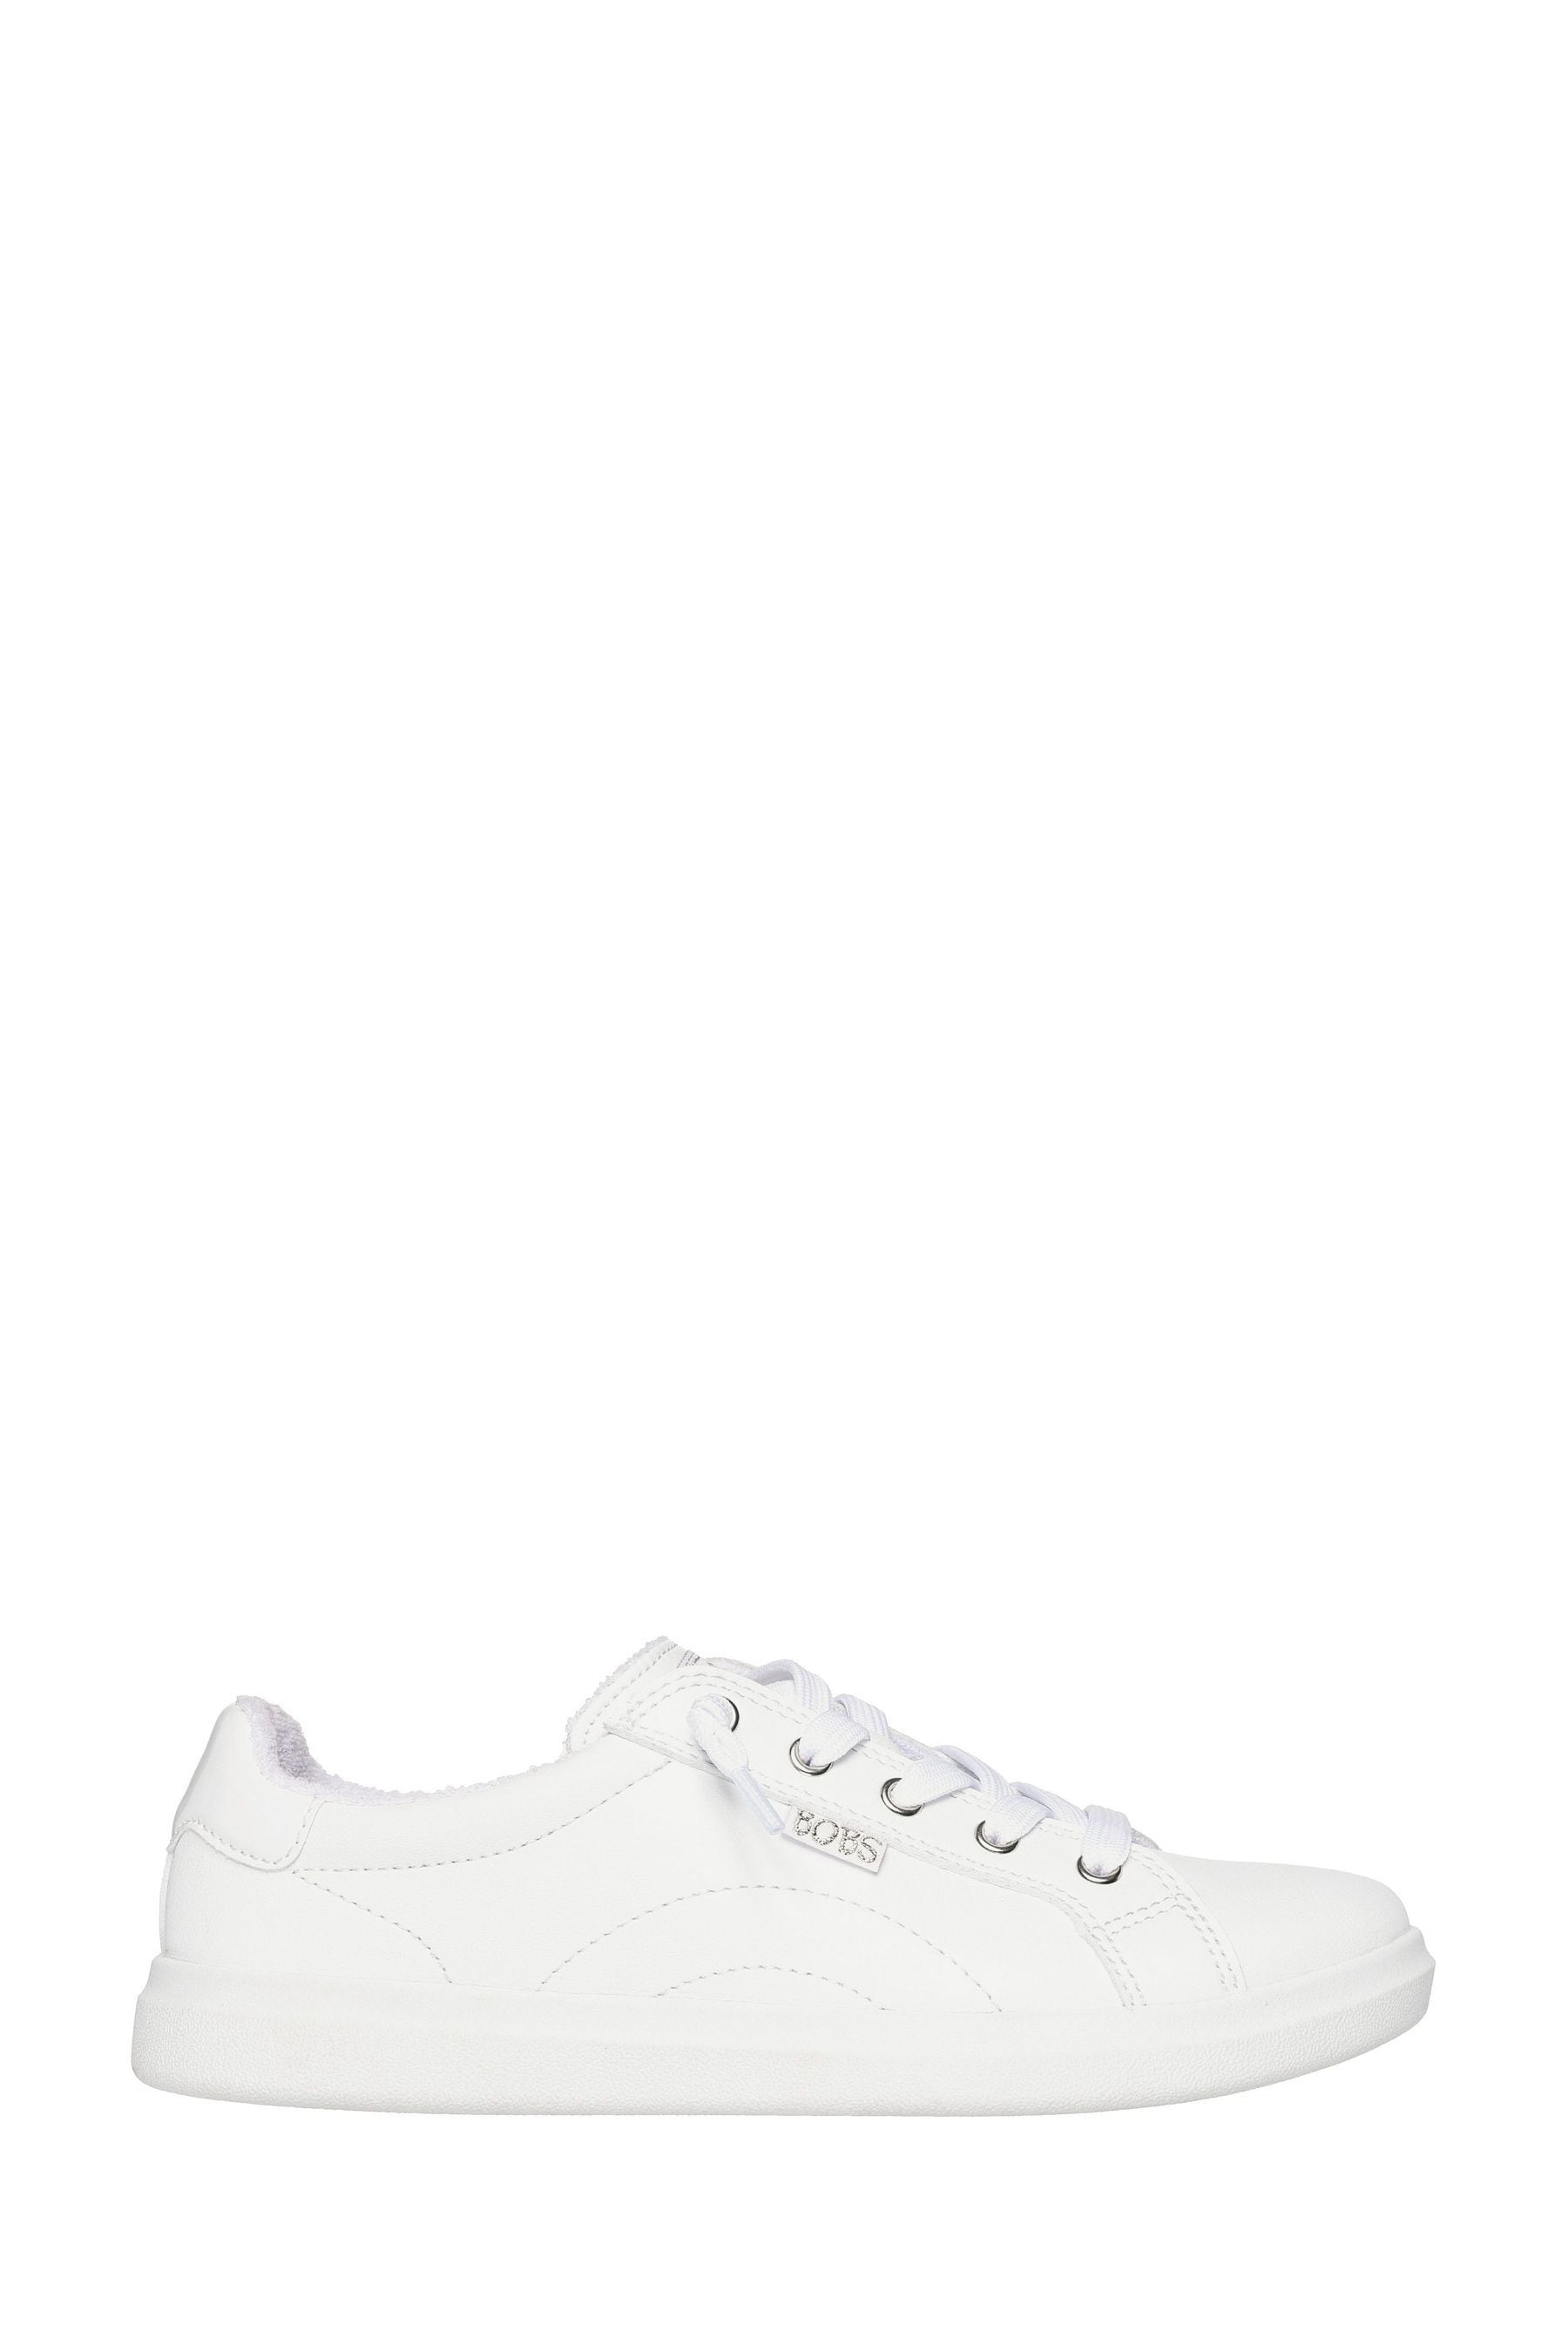 Buy Skechers White Womens Bobs D Vine Instant Delight Trainers from the ...